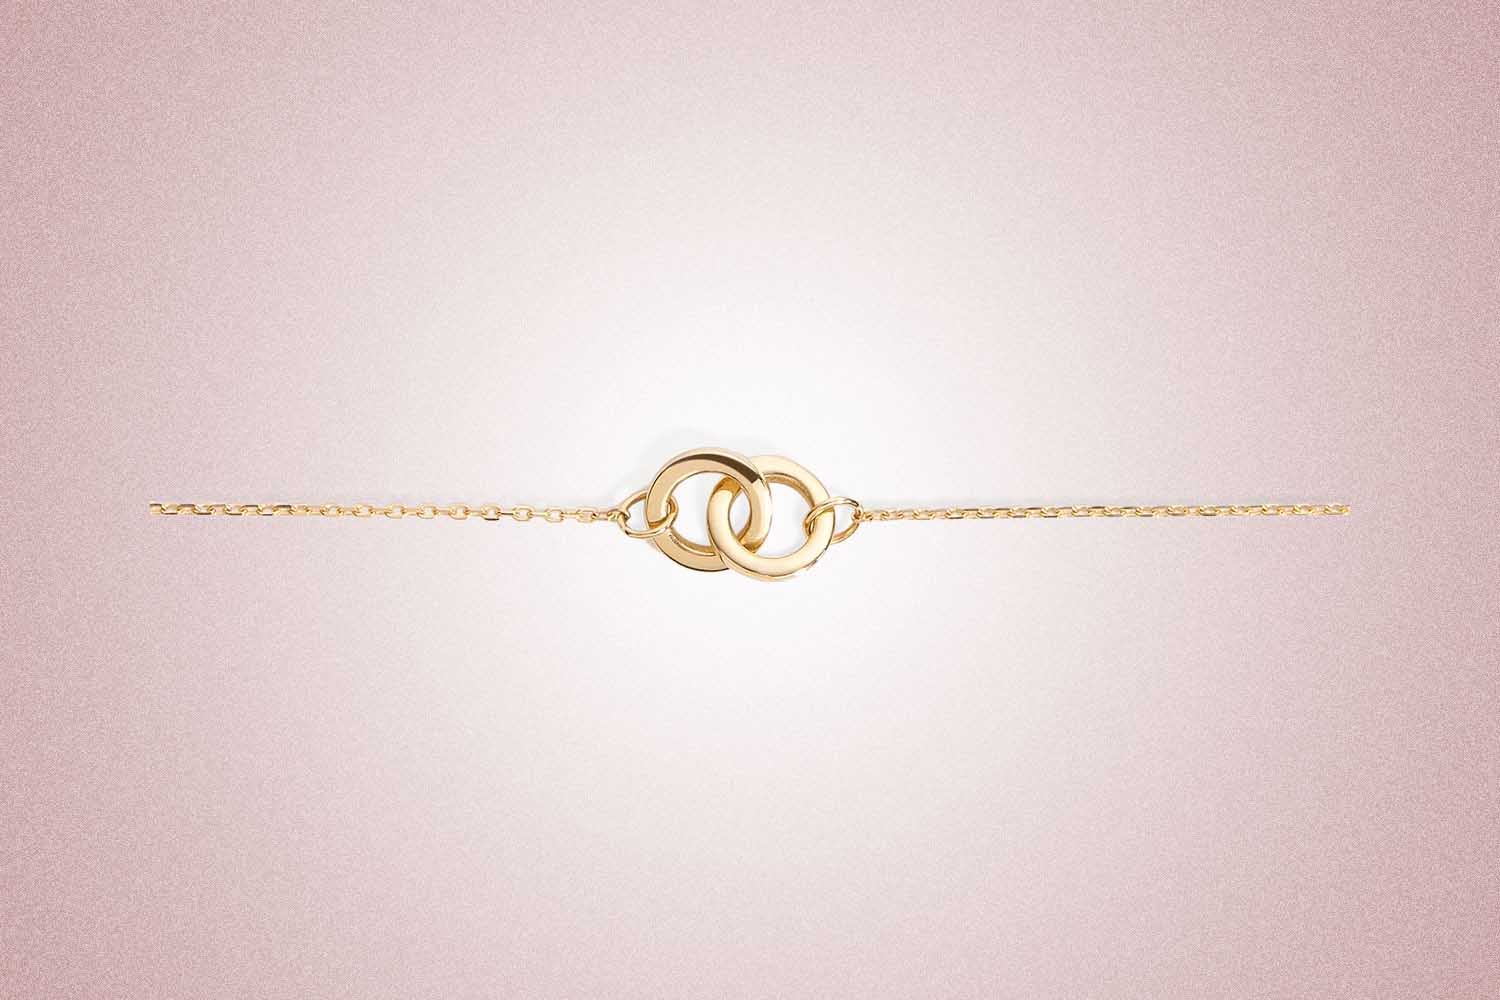 A gold bracelet with two interlocking loops at the center from Aurate, a perfect Valentine’s Day gift for 2022, on a pink background.